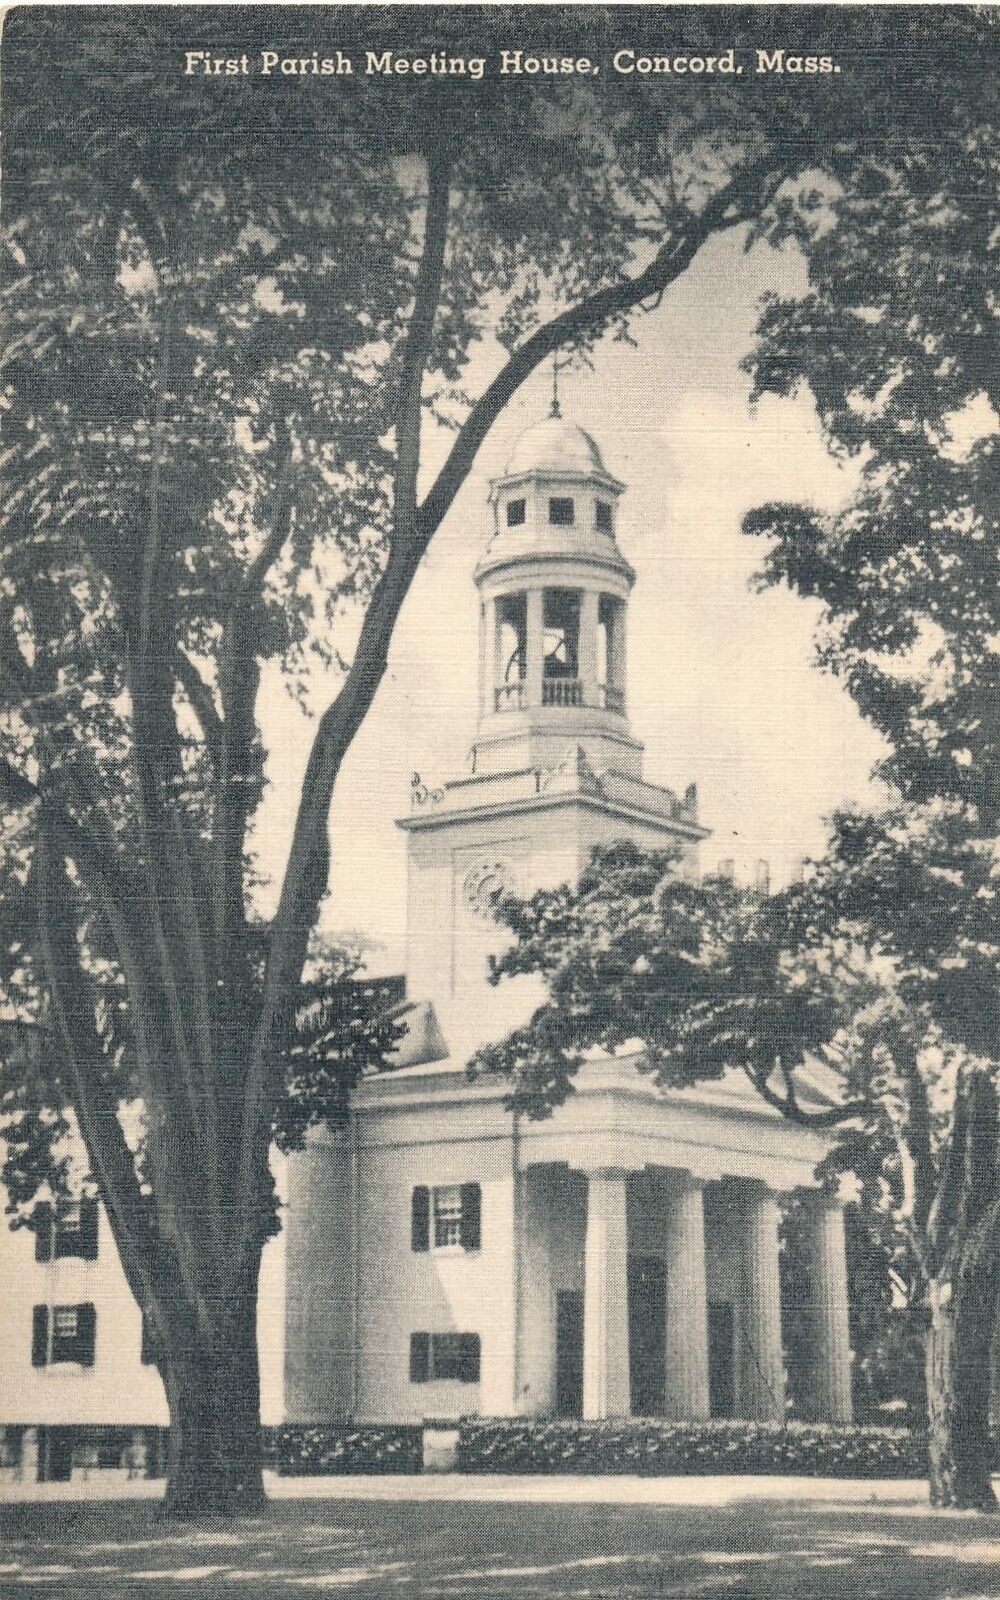 CONCORD MA – First Parish Meeting House - 1950